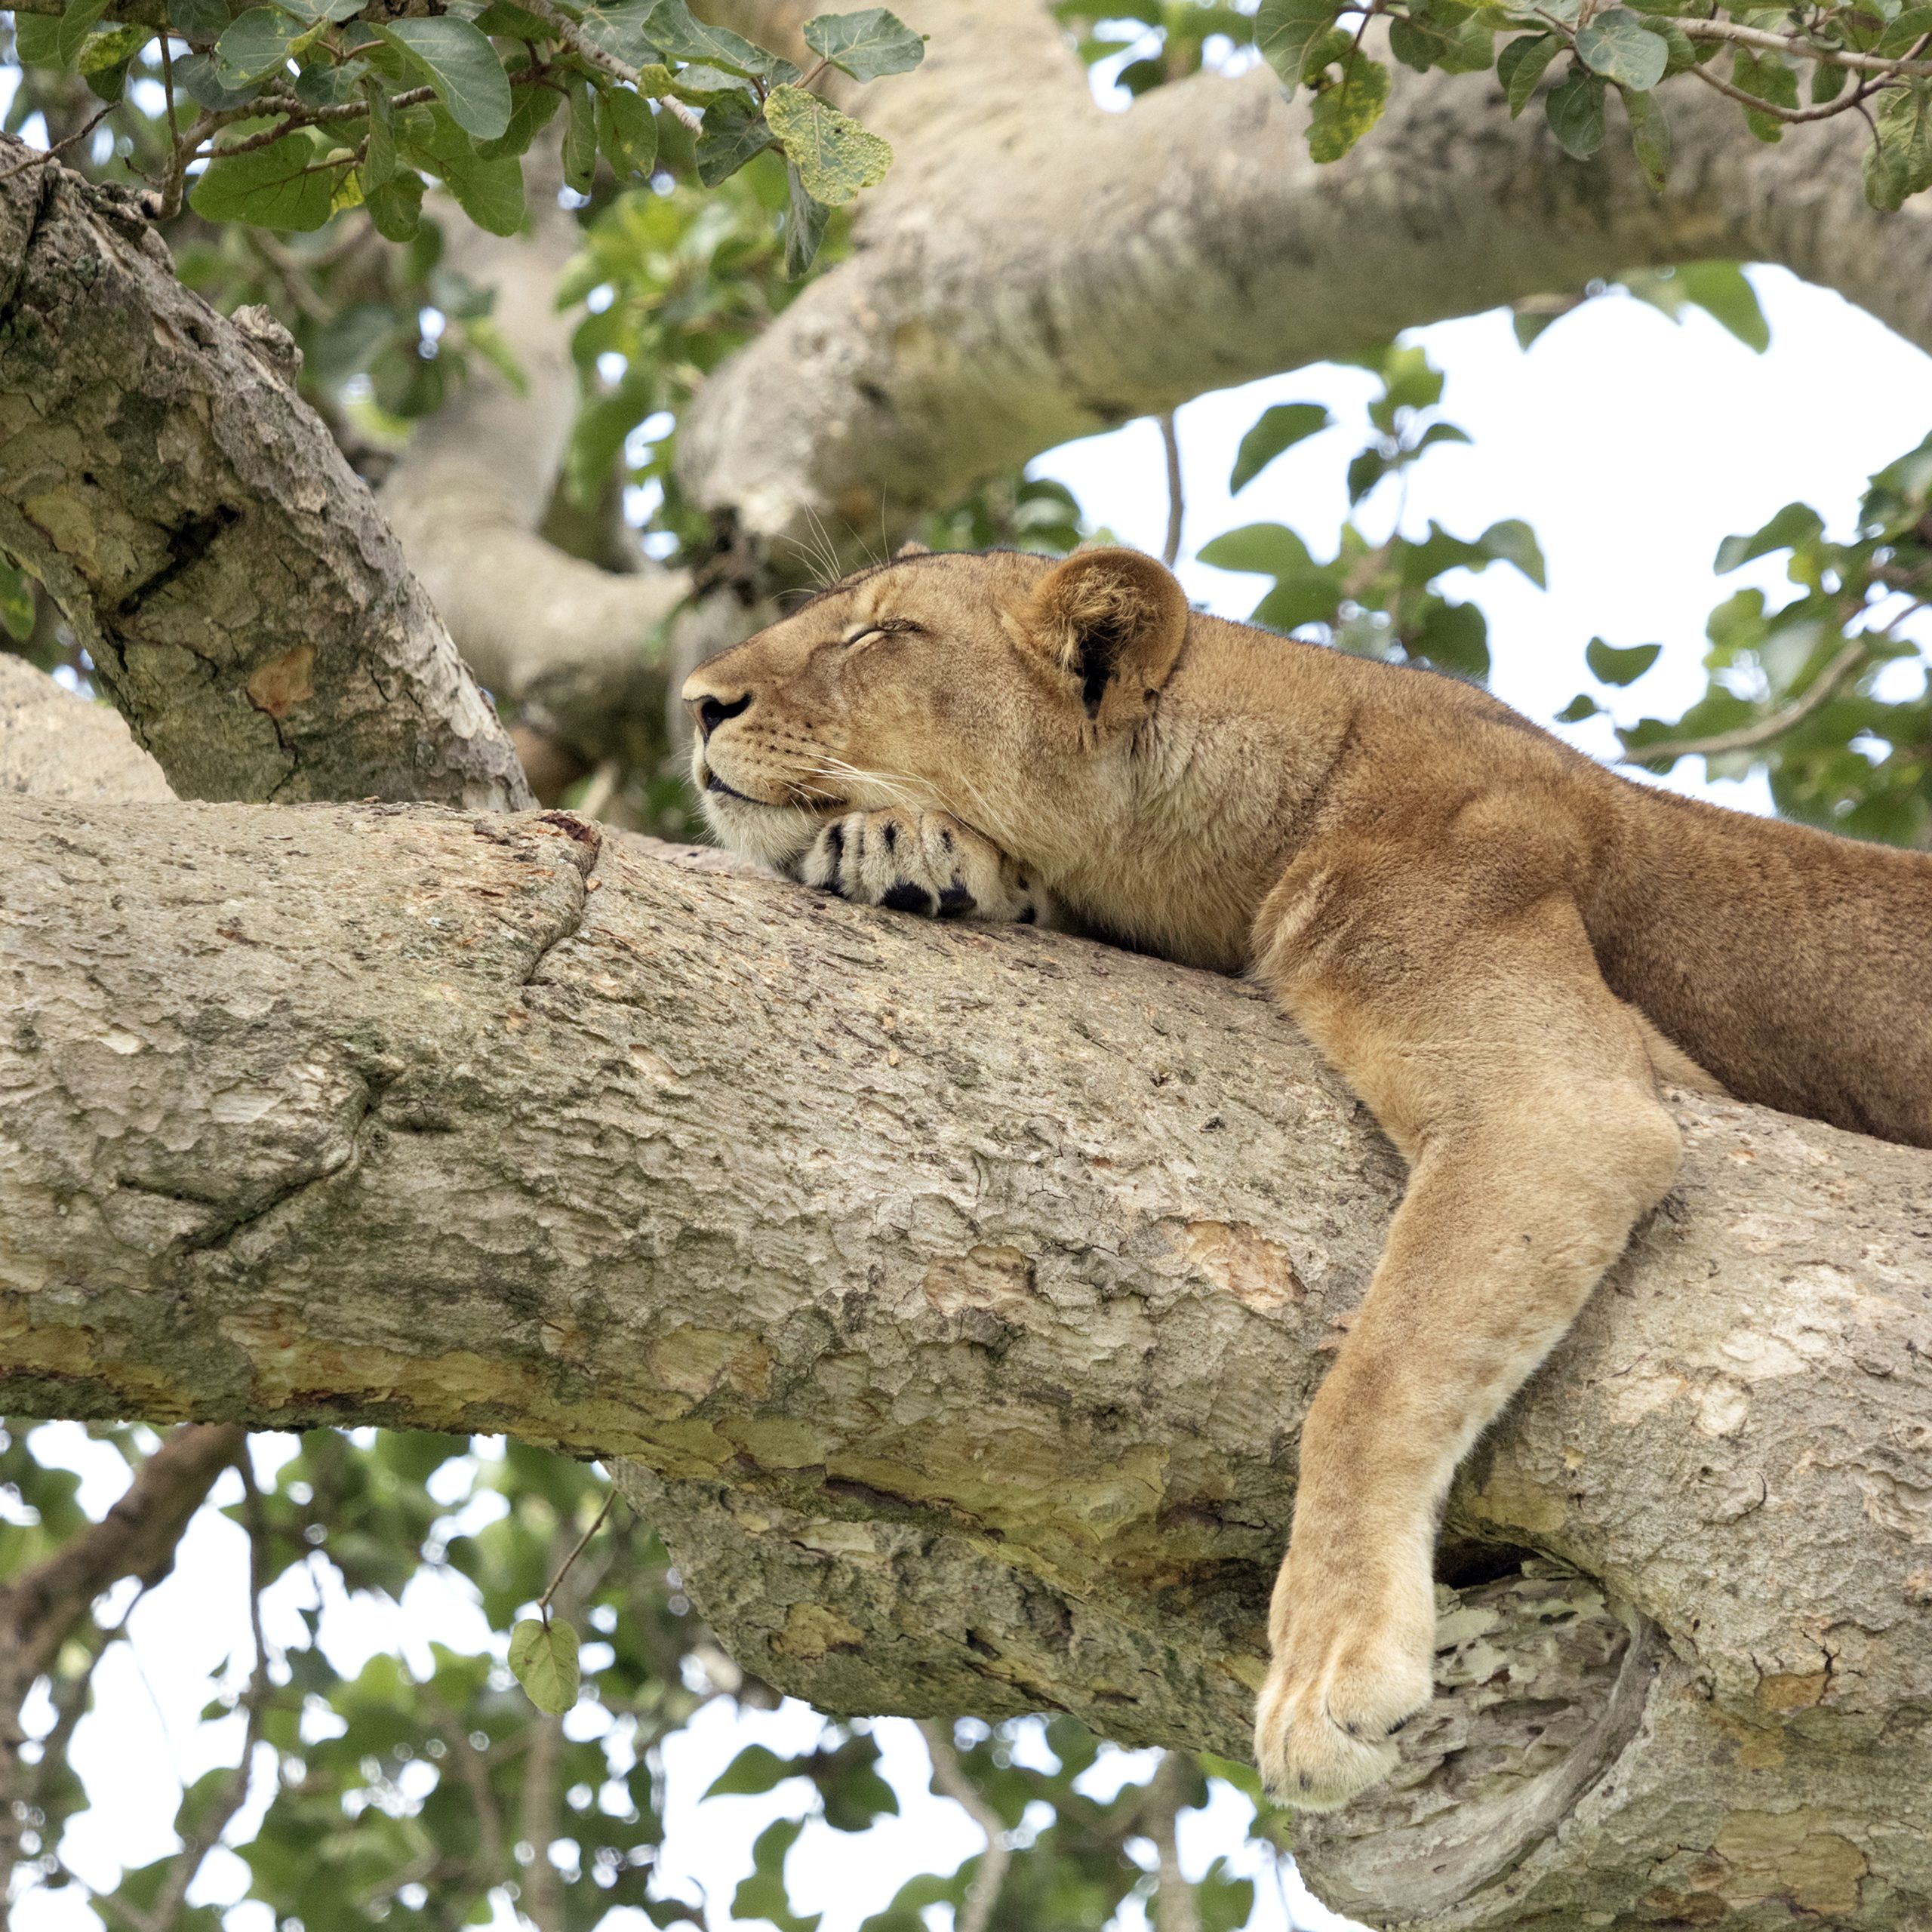 Gorillas, chimps and tree-climbing lions